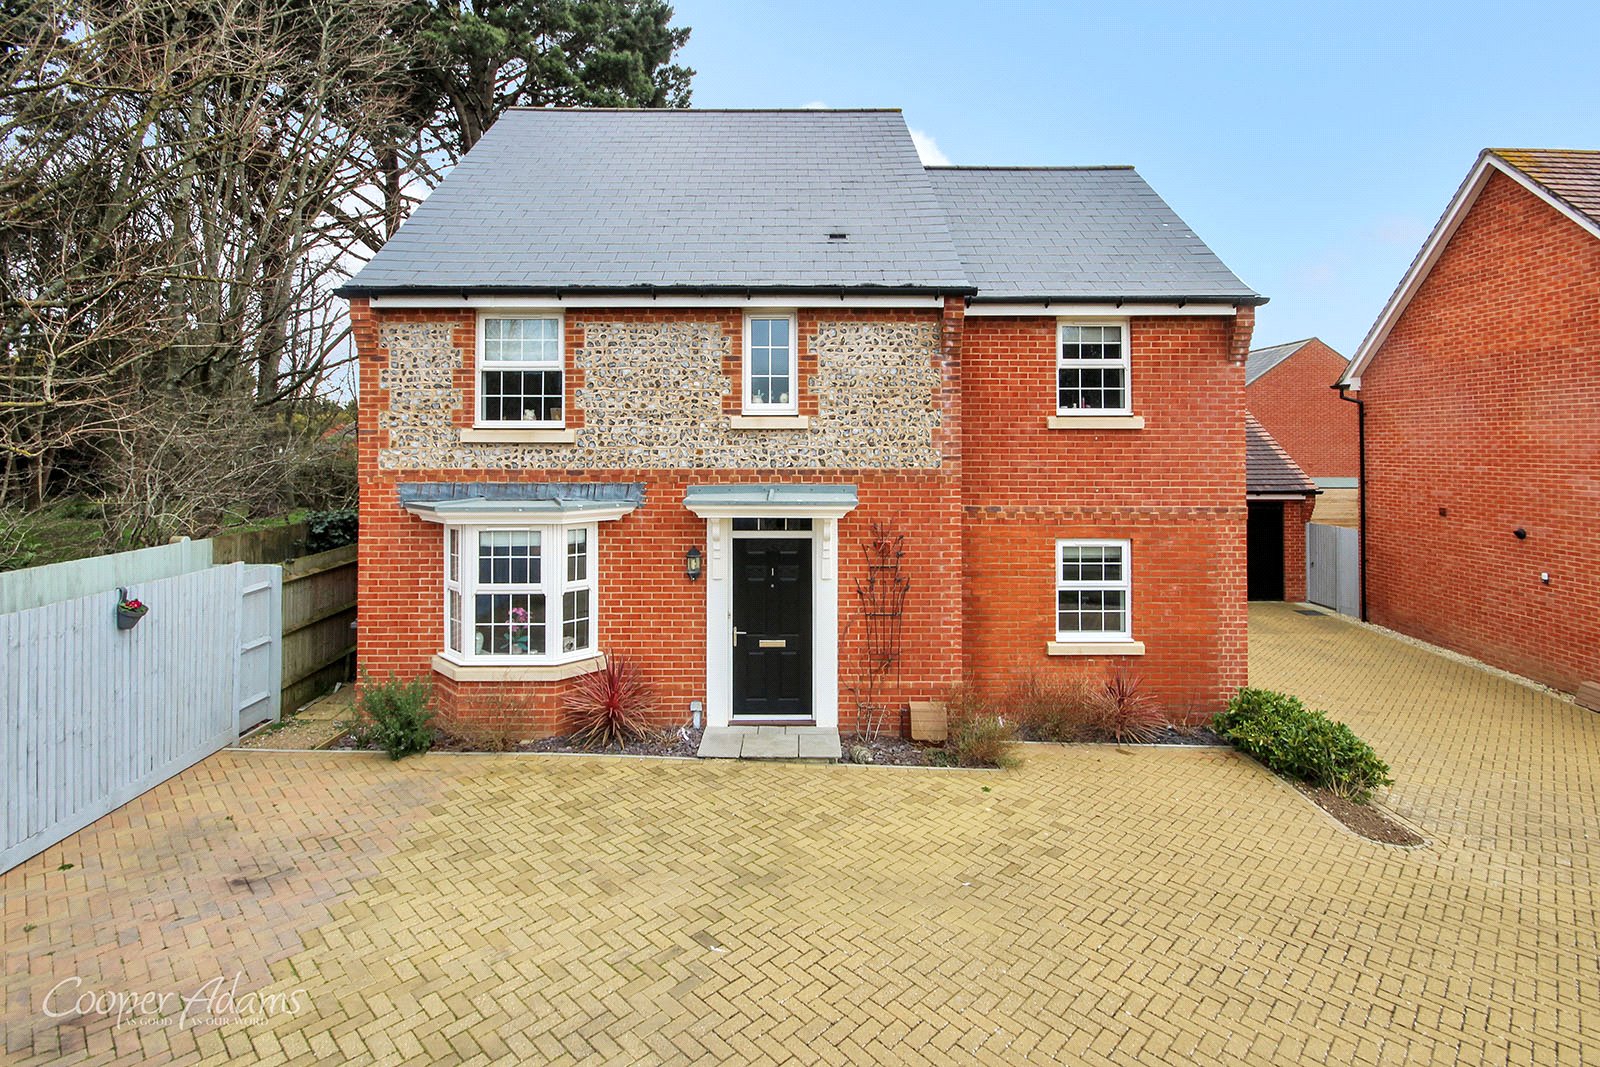 4 bed house for sale - Property Image 1